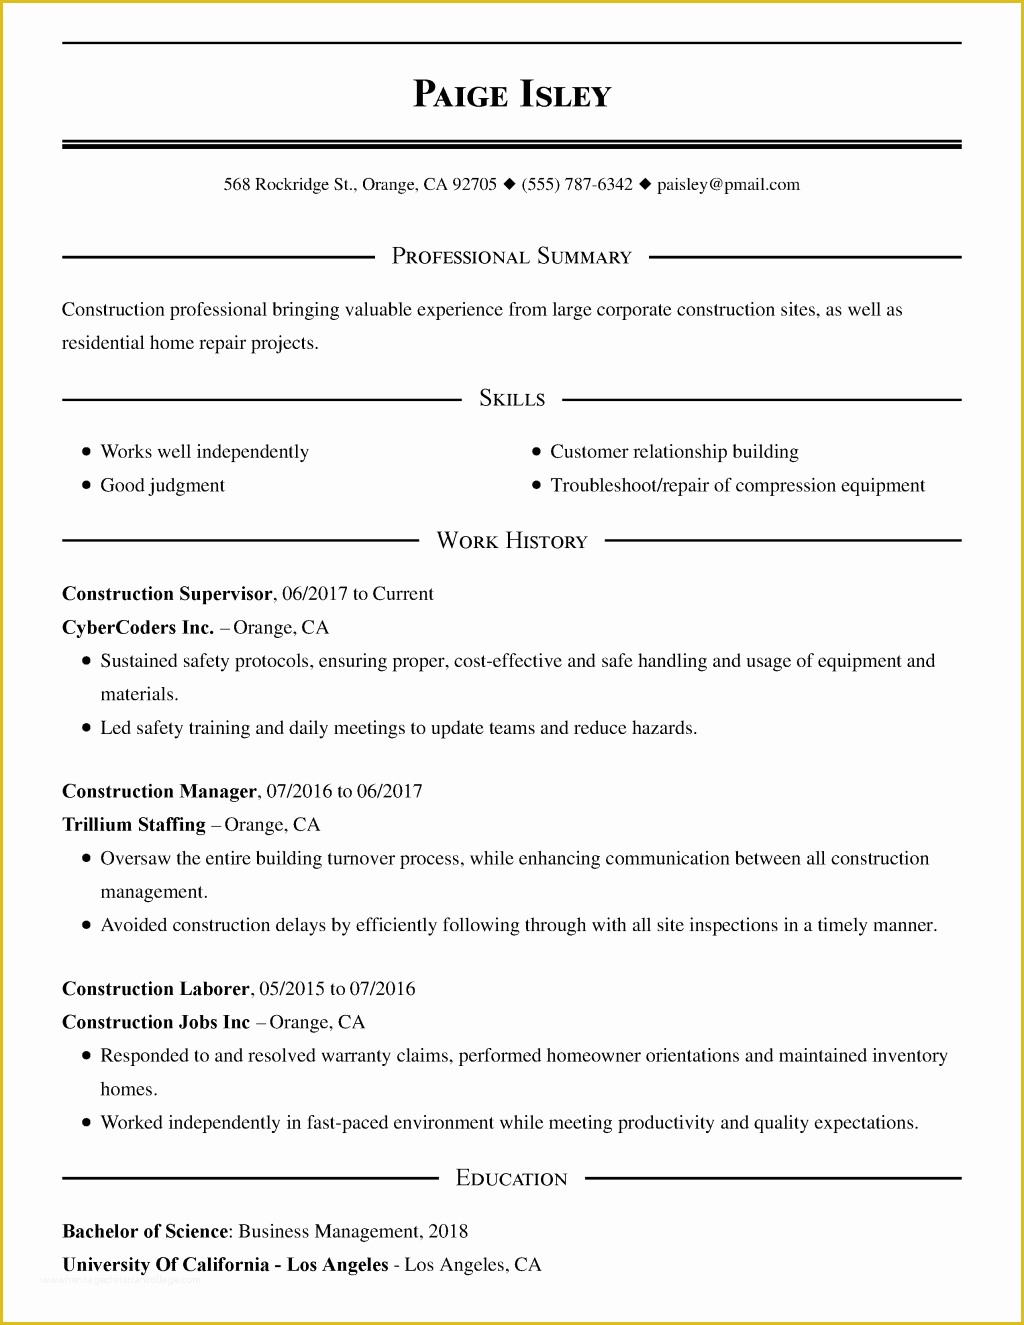 Pdf Resume Template Free Download Of Best Professional Resume Templates 2018 Tag 53 Fantastic